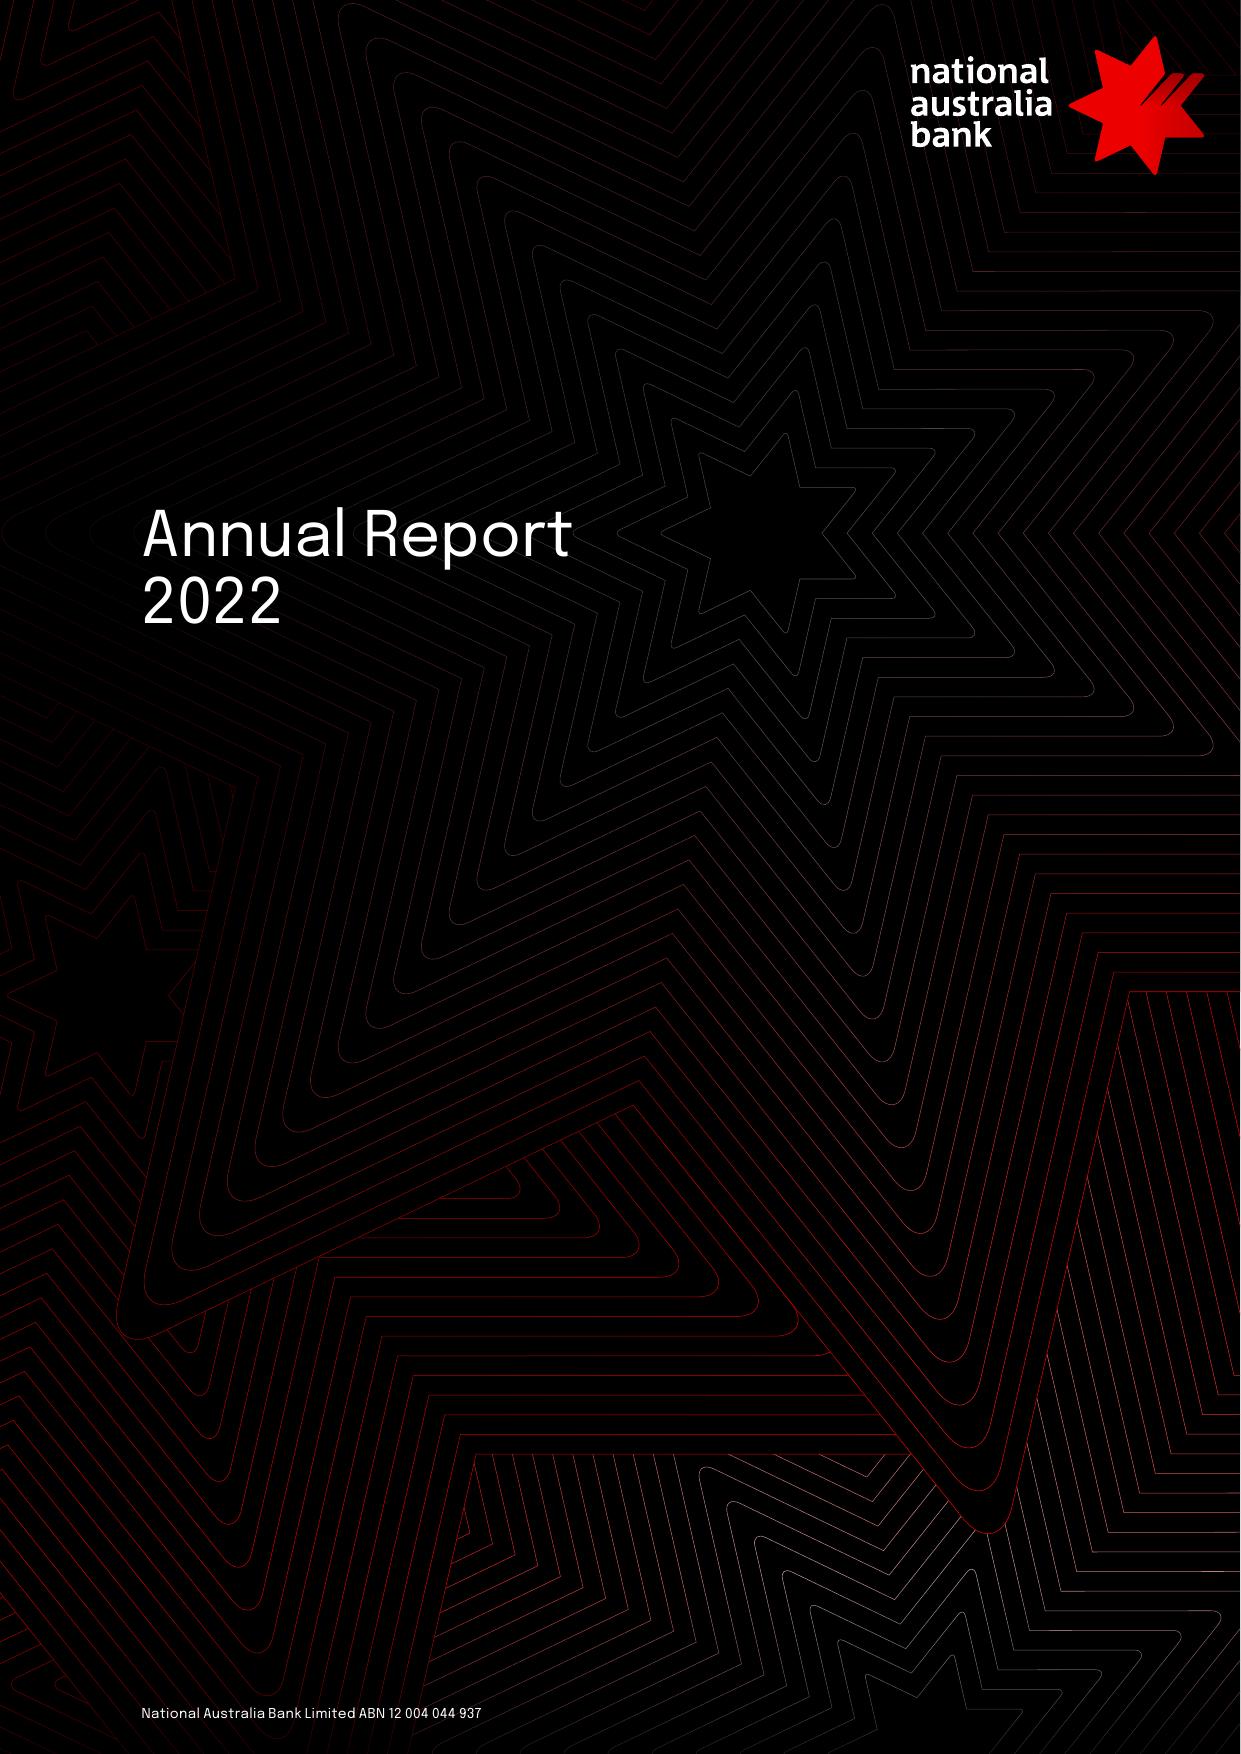 GUIDEHOUSE 2022 Annual Report